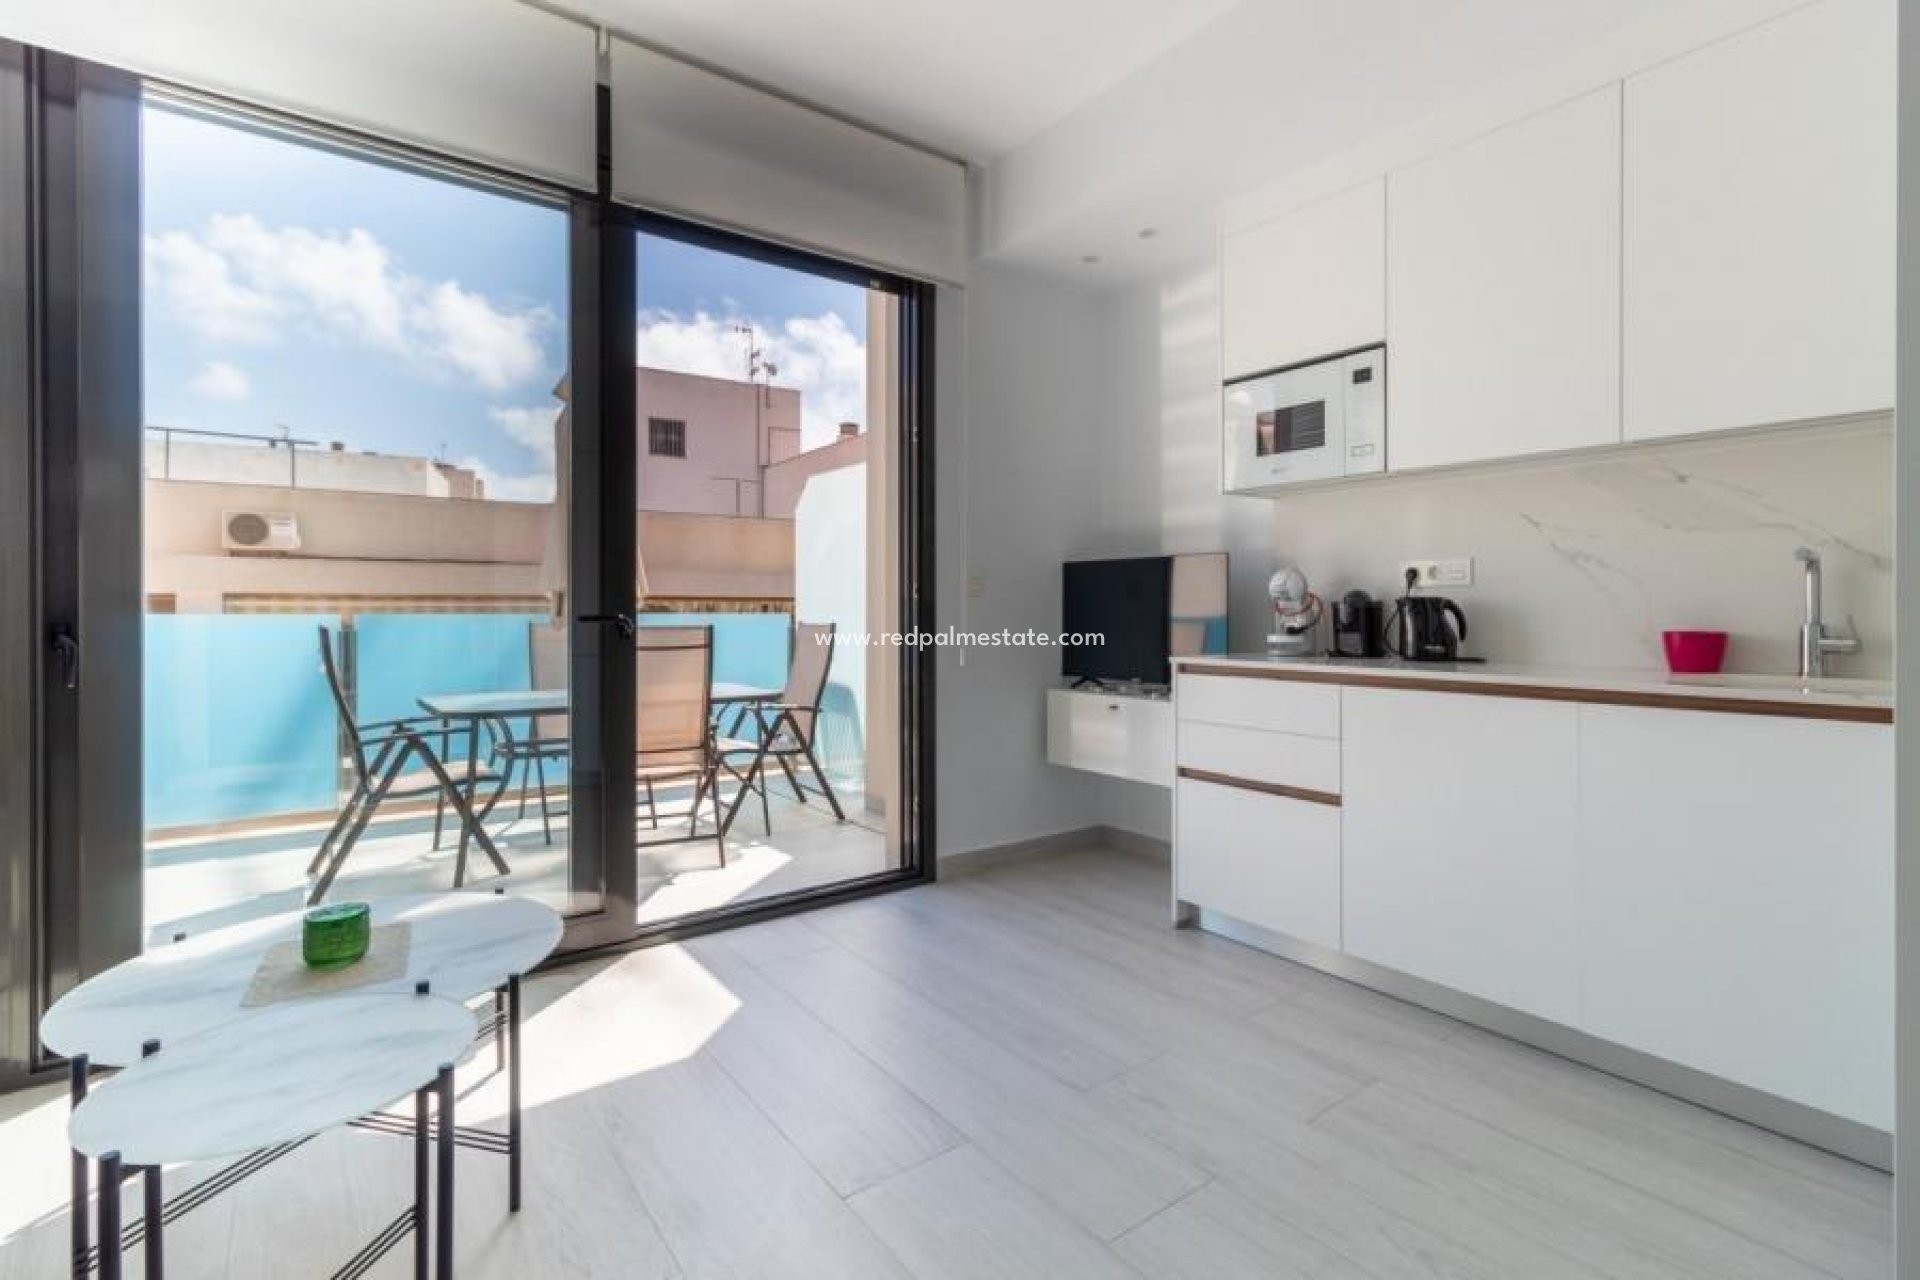 Resale - Penthouse -
Torrevieja - Paseo maritimo